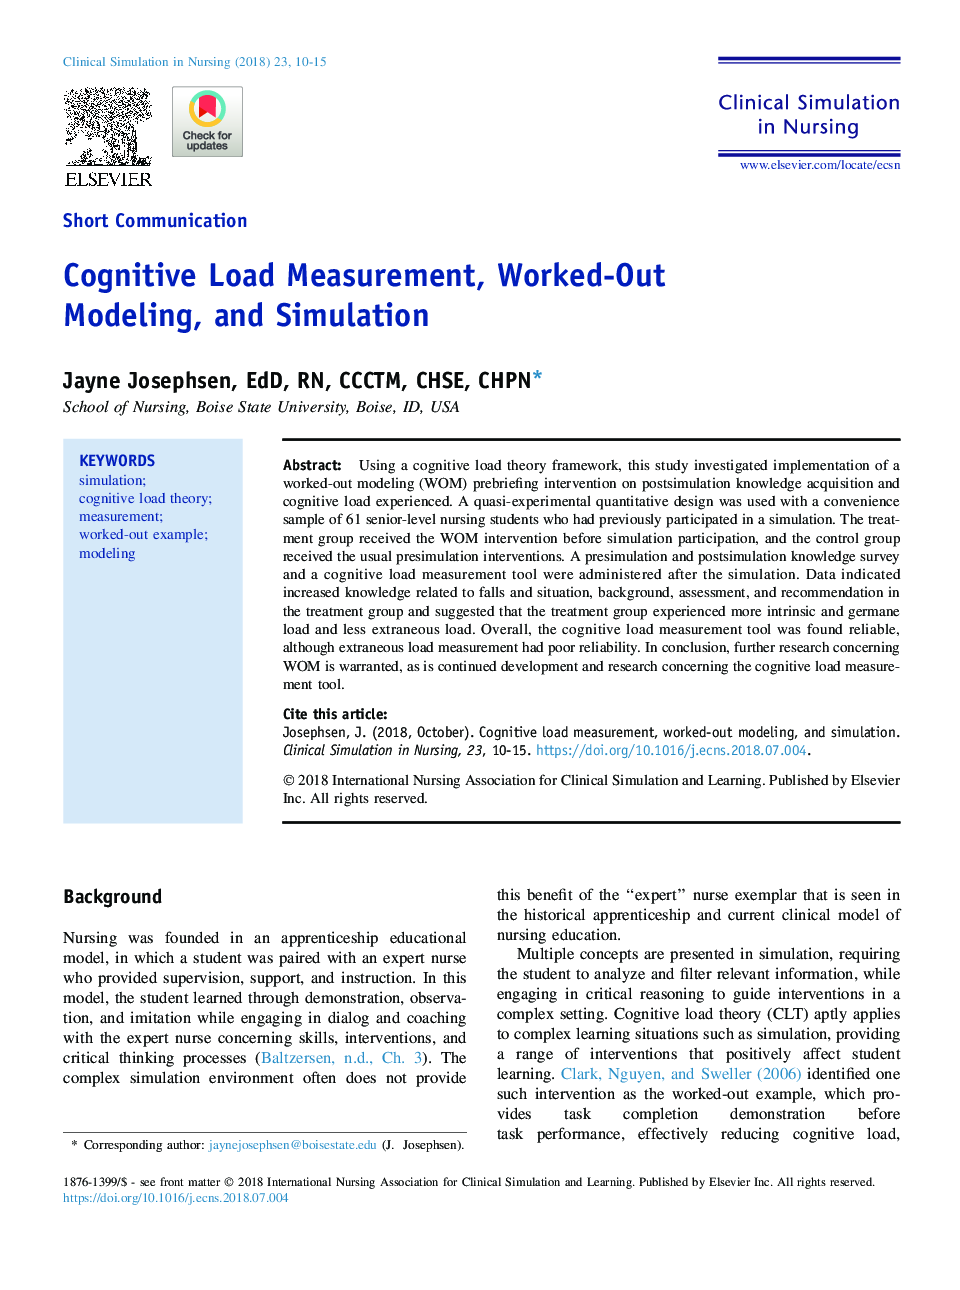 Cognitive Load Measurement, Worked-Out Modeling, and Simulation